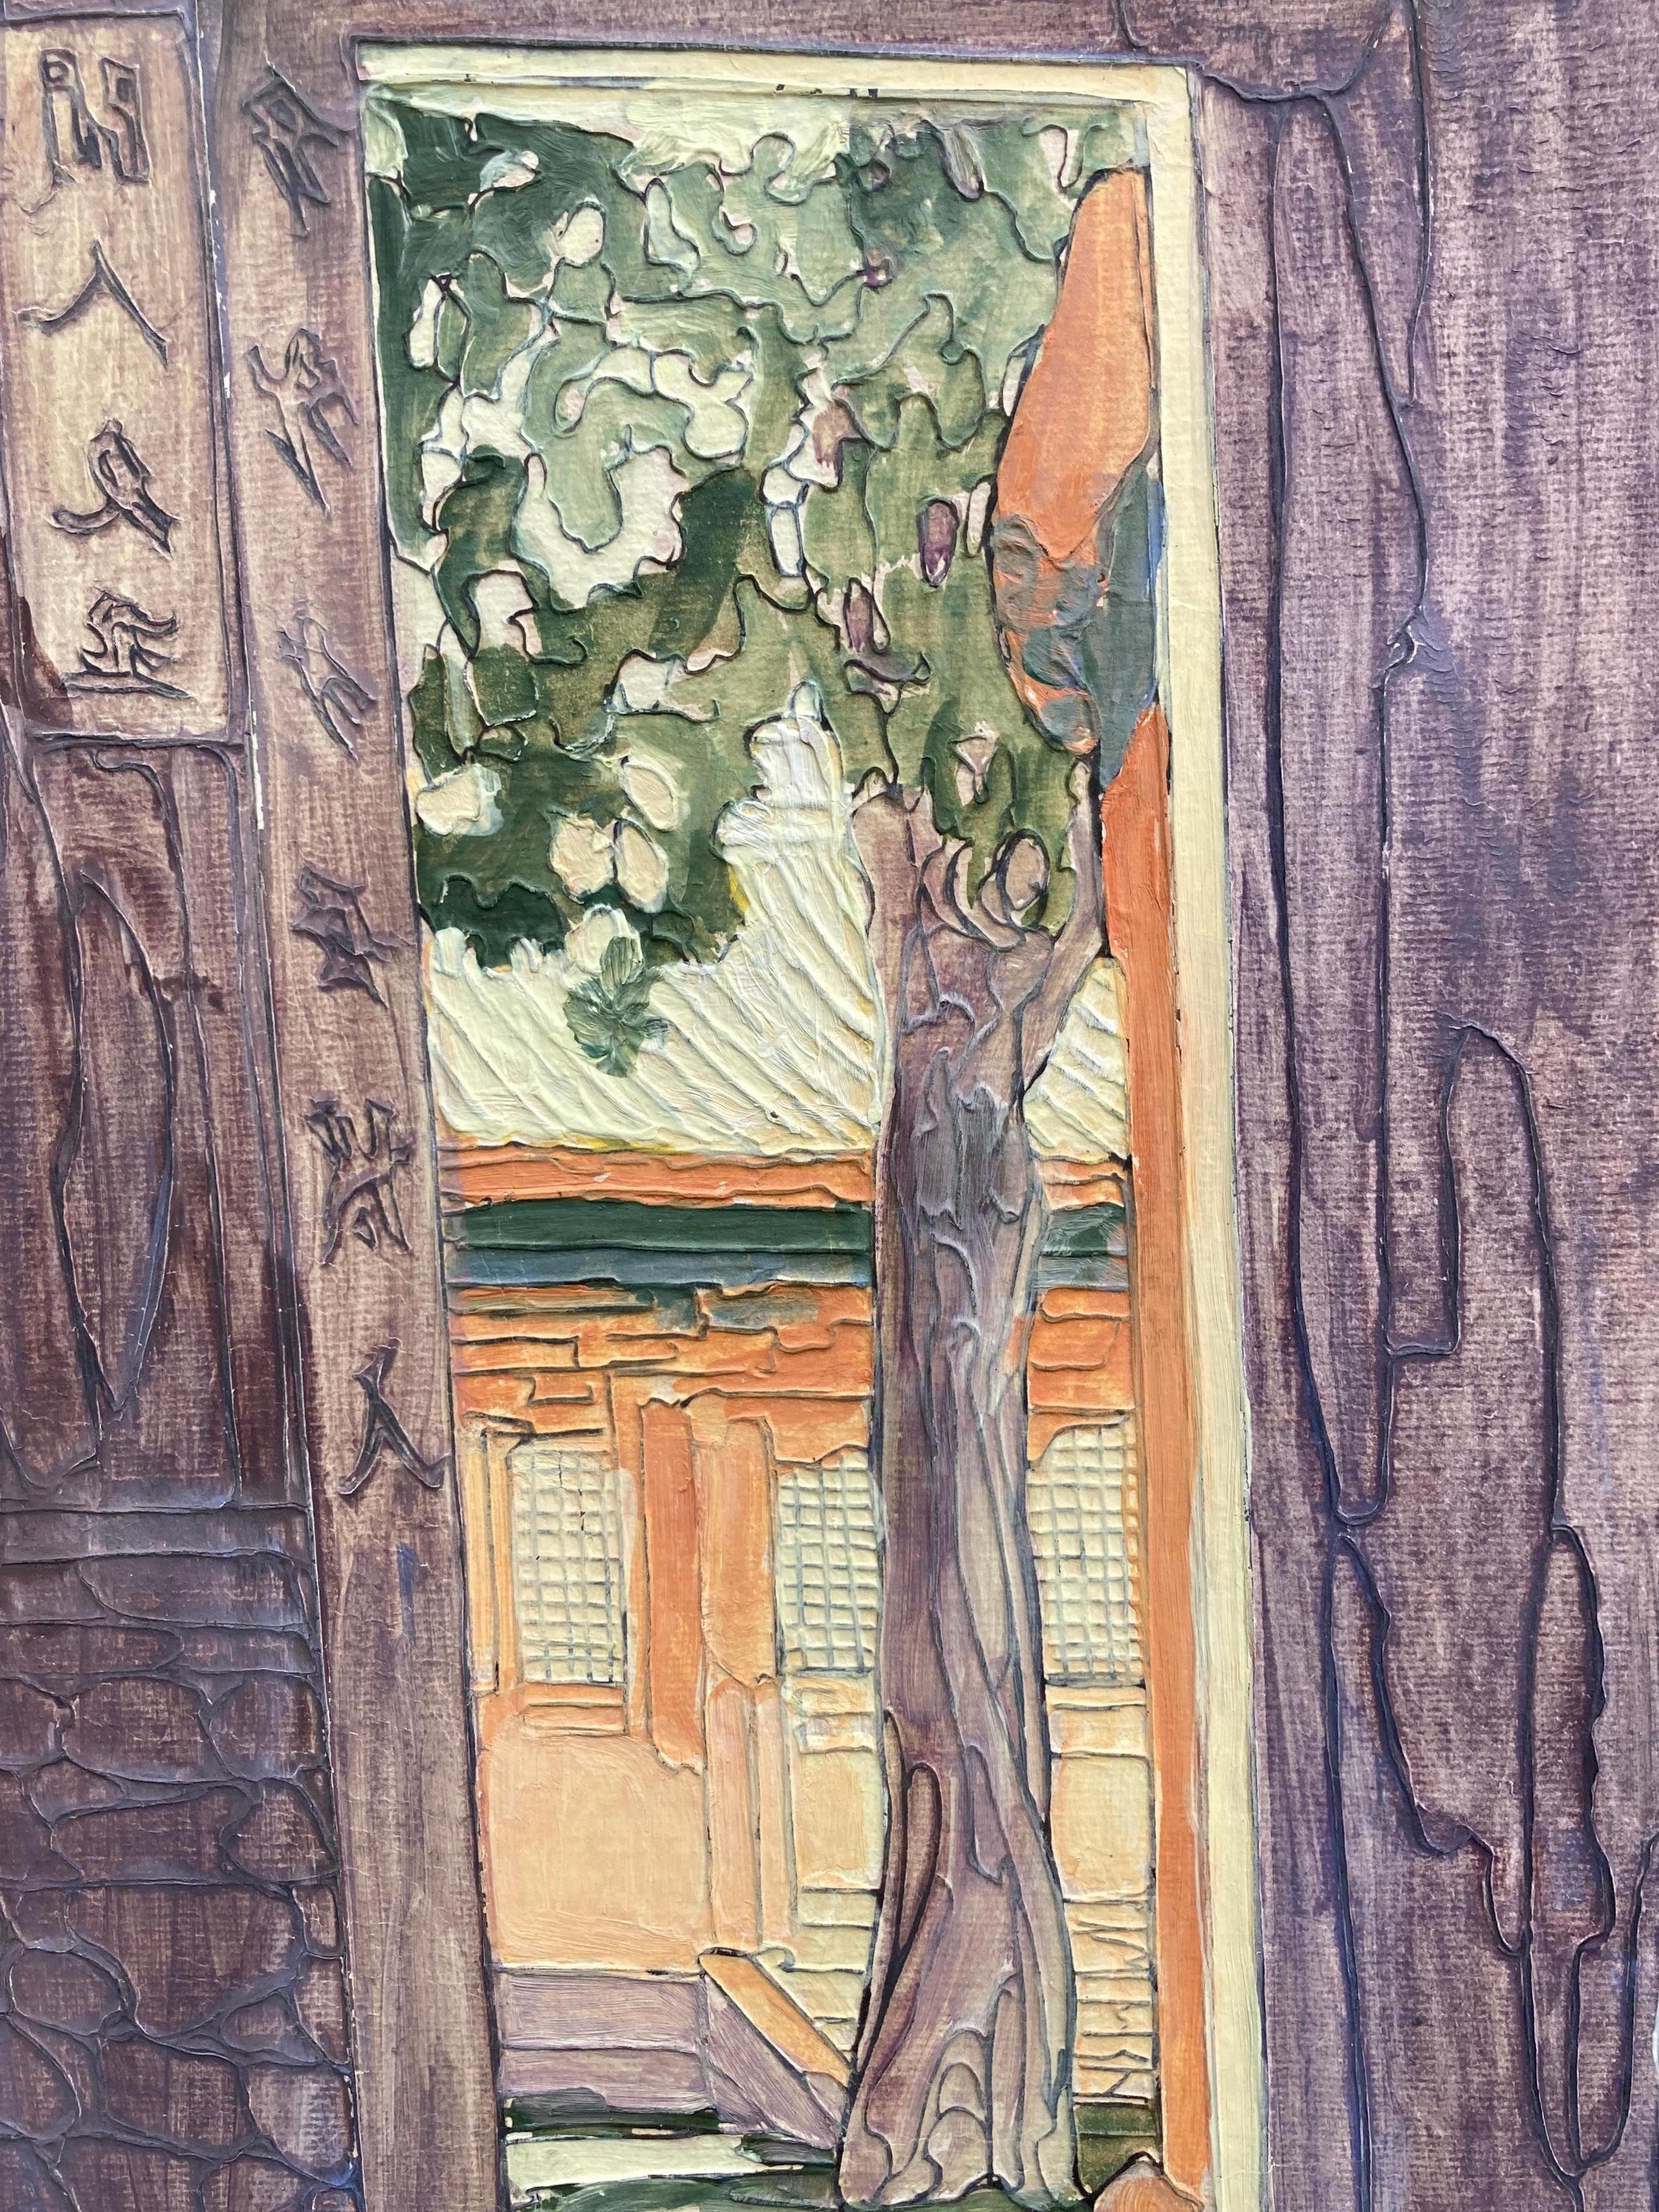 
BERTHA LUM (American 1879-1954)

GARDEN DOOR, 1929 (Gravalos and Pulin 93)
Raised line embossed and hand colored print. Signed in pencil within the image. 
14 3/8 x 8 7/8 inched. Beautiful texture and image. Very good condition. Trimmed 
to the